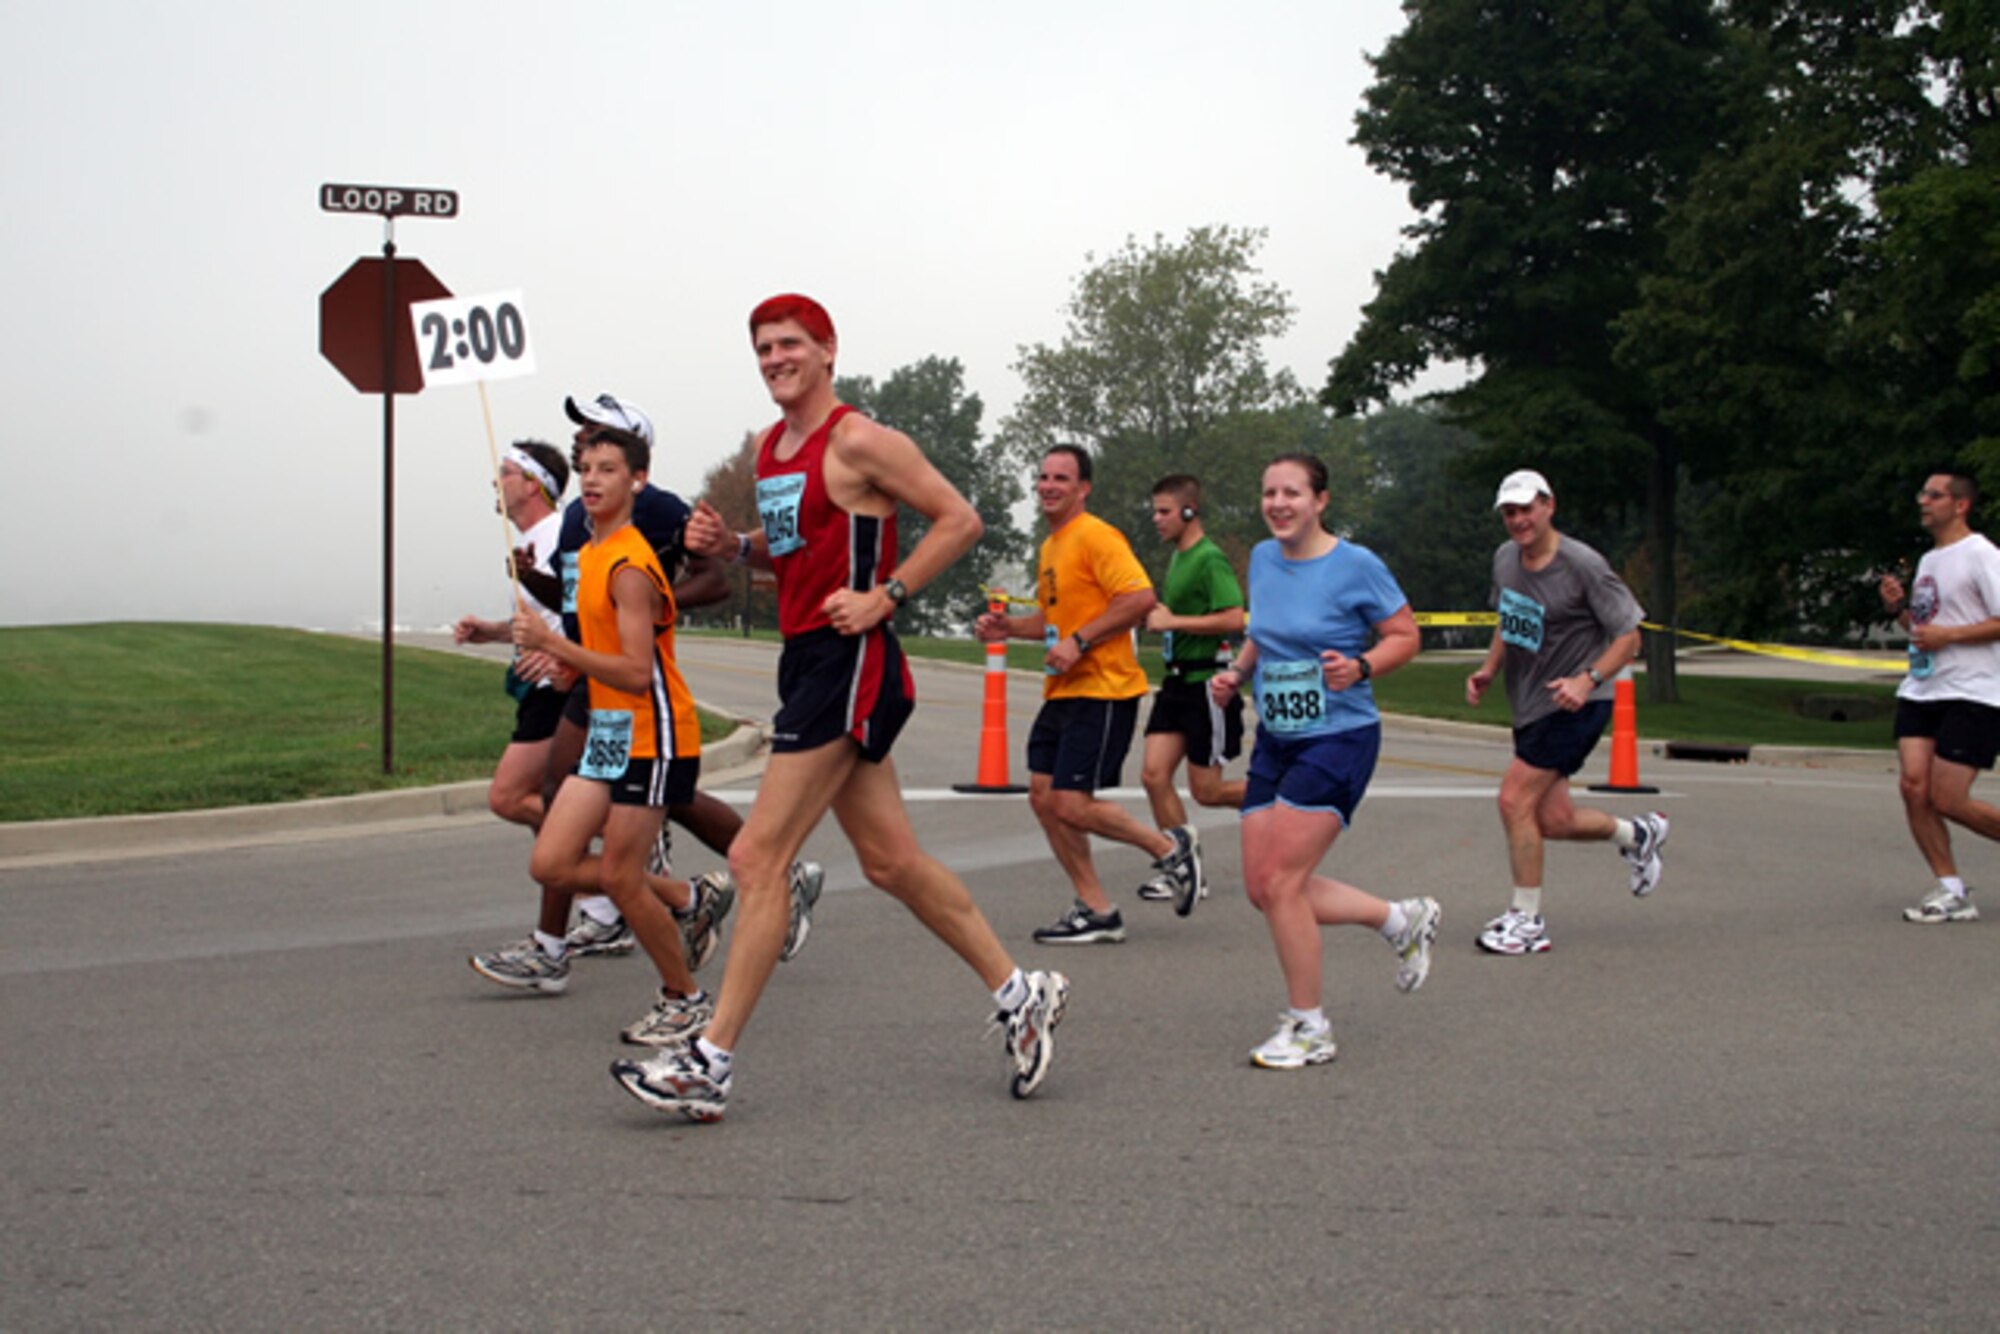 Jim Crist, a member of the Air Force Marathon Pace Team, runs with his group during the 2006 Air Force Marathon in Area B. (Air Force photo)